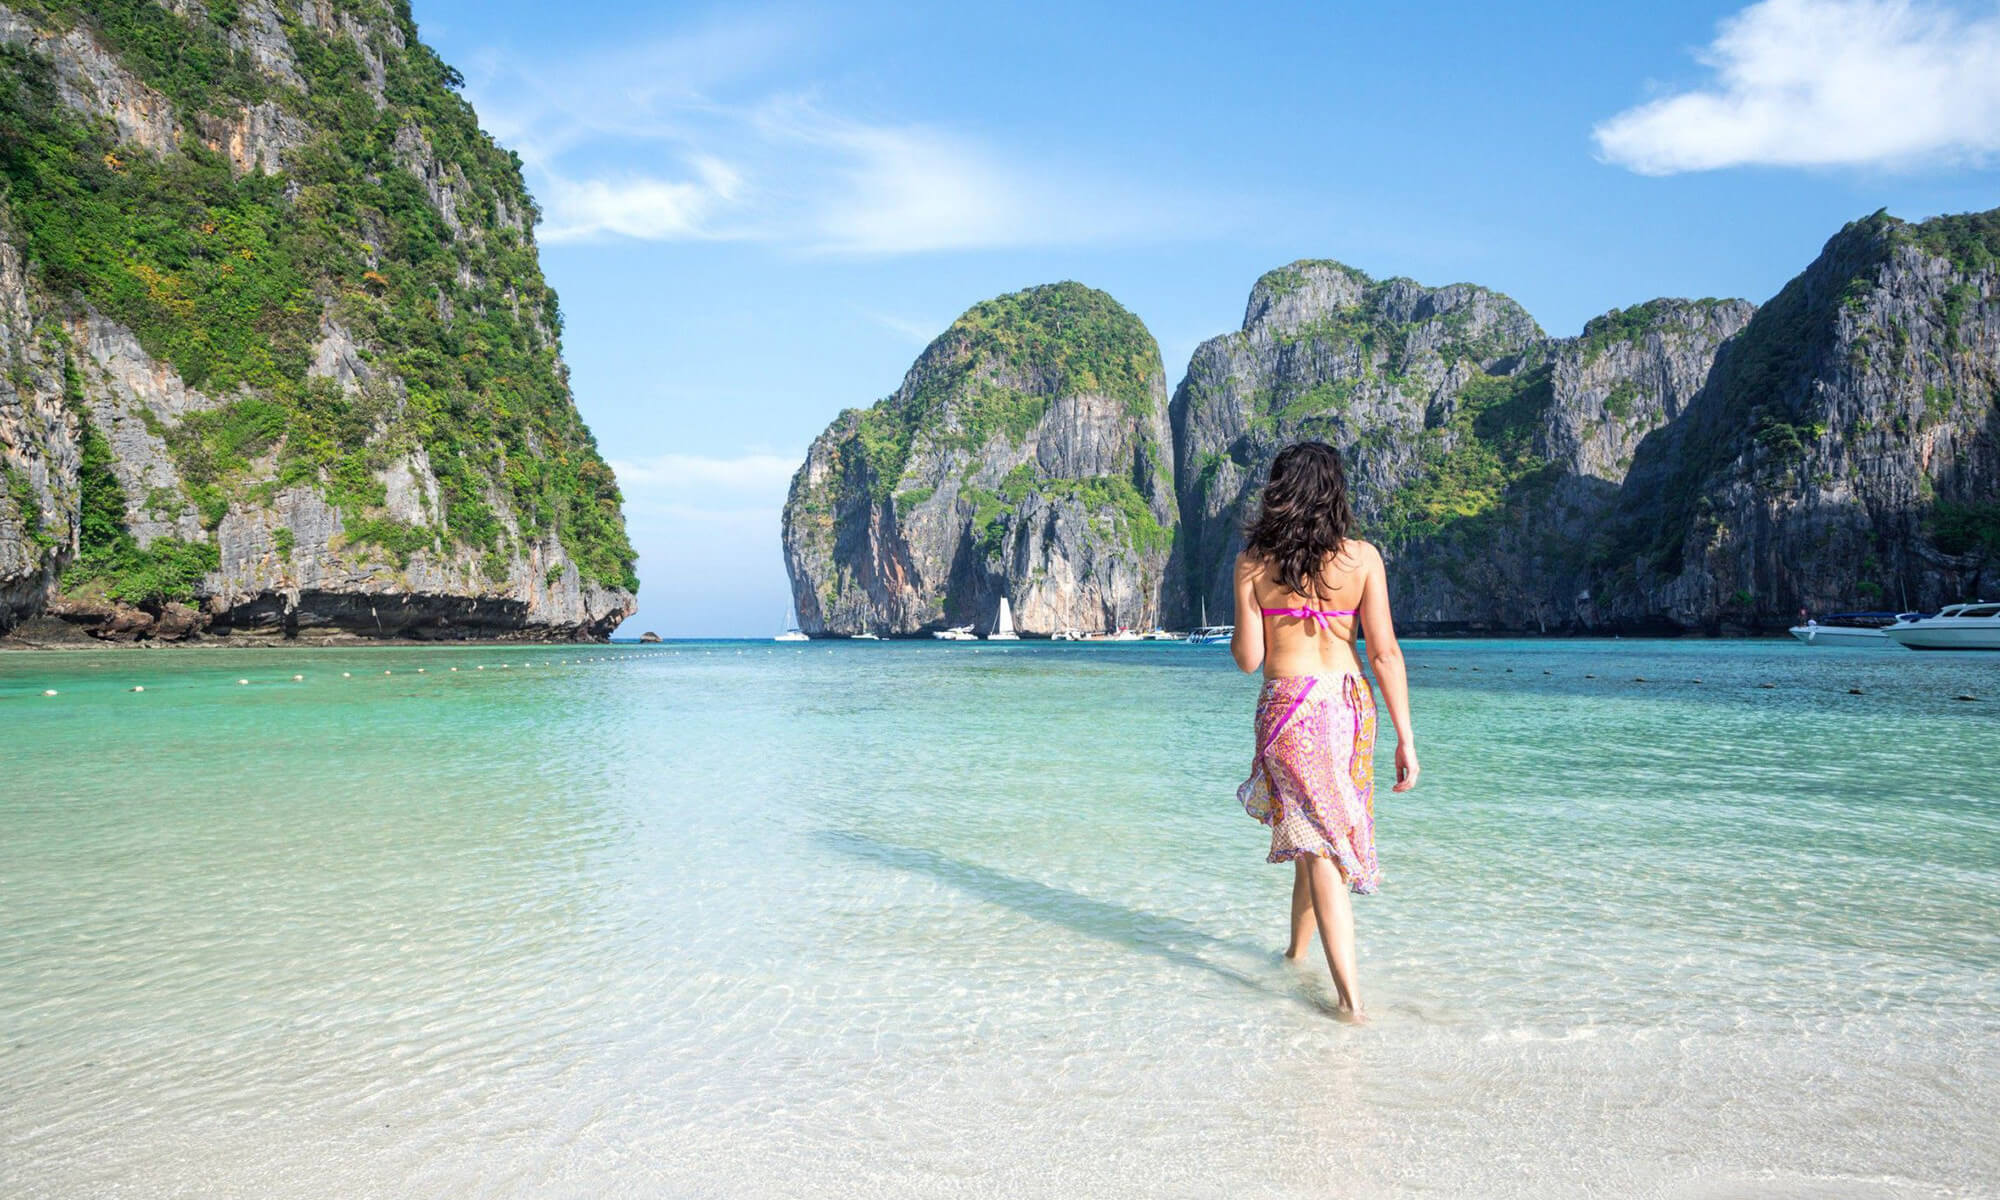 The Krabi province has a tropical humid climate with temperatures ranging from 27 to 29 degrees Celsius